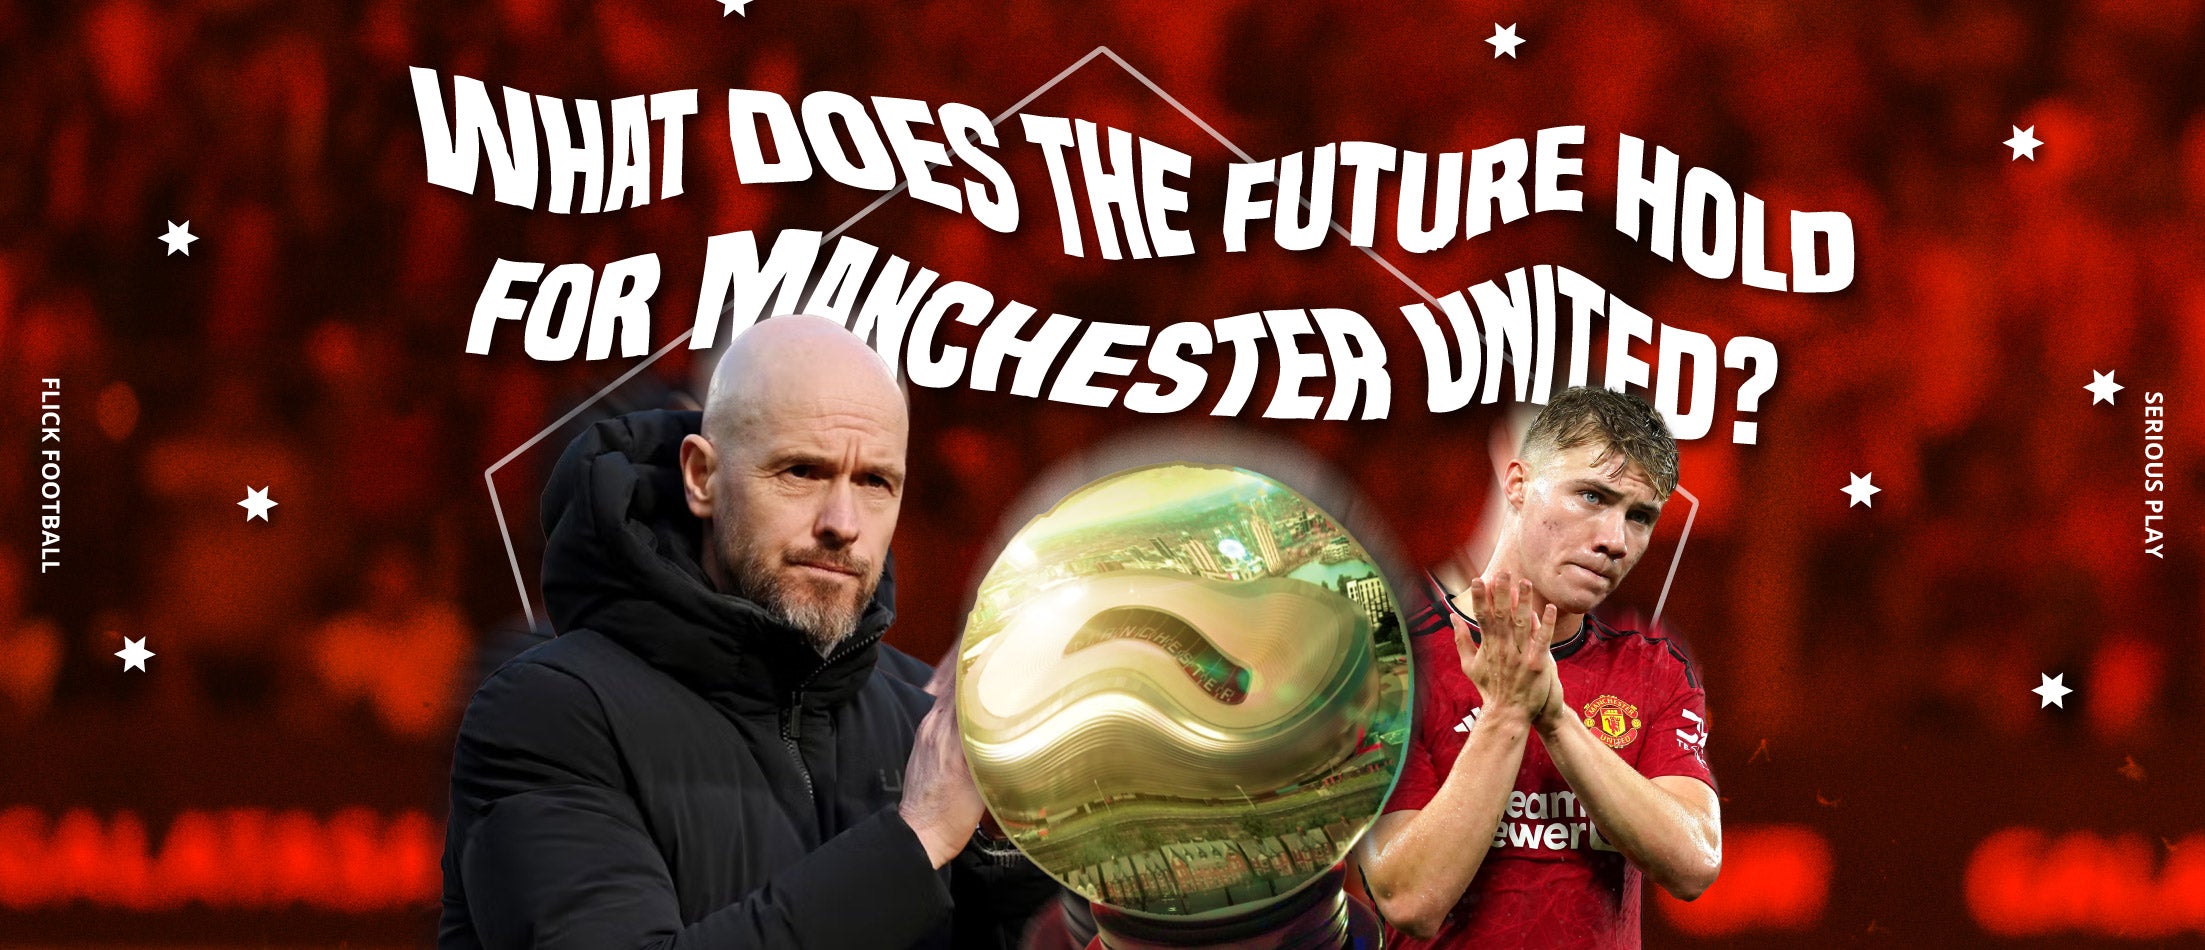 What does the future hold for Manchester United?